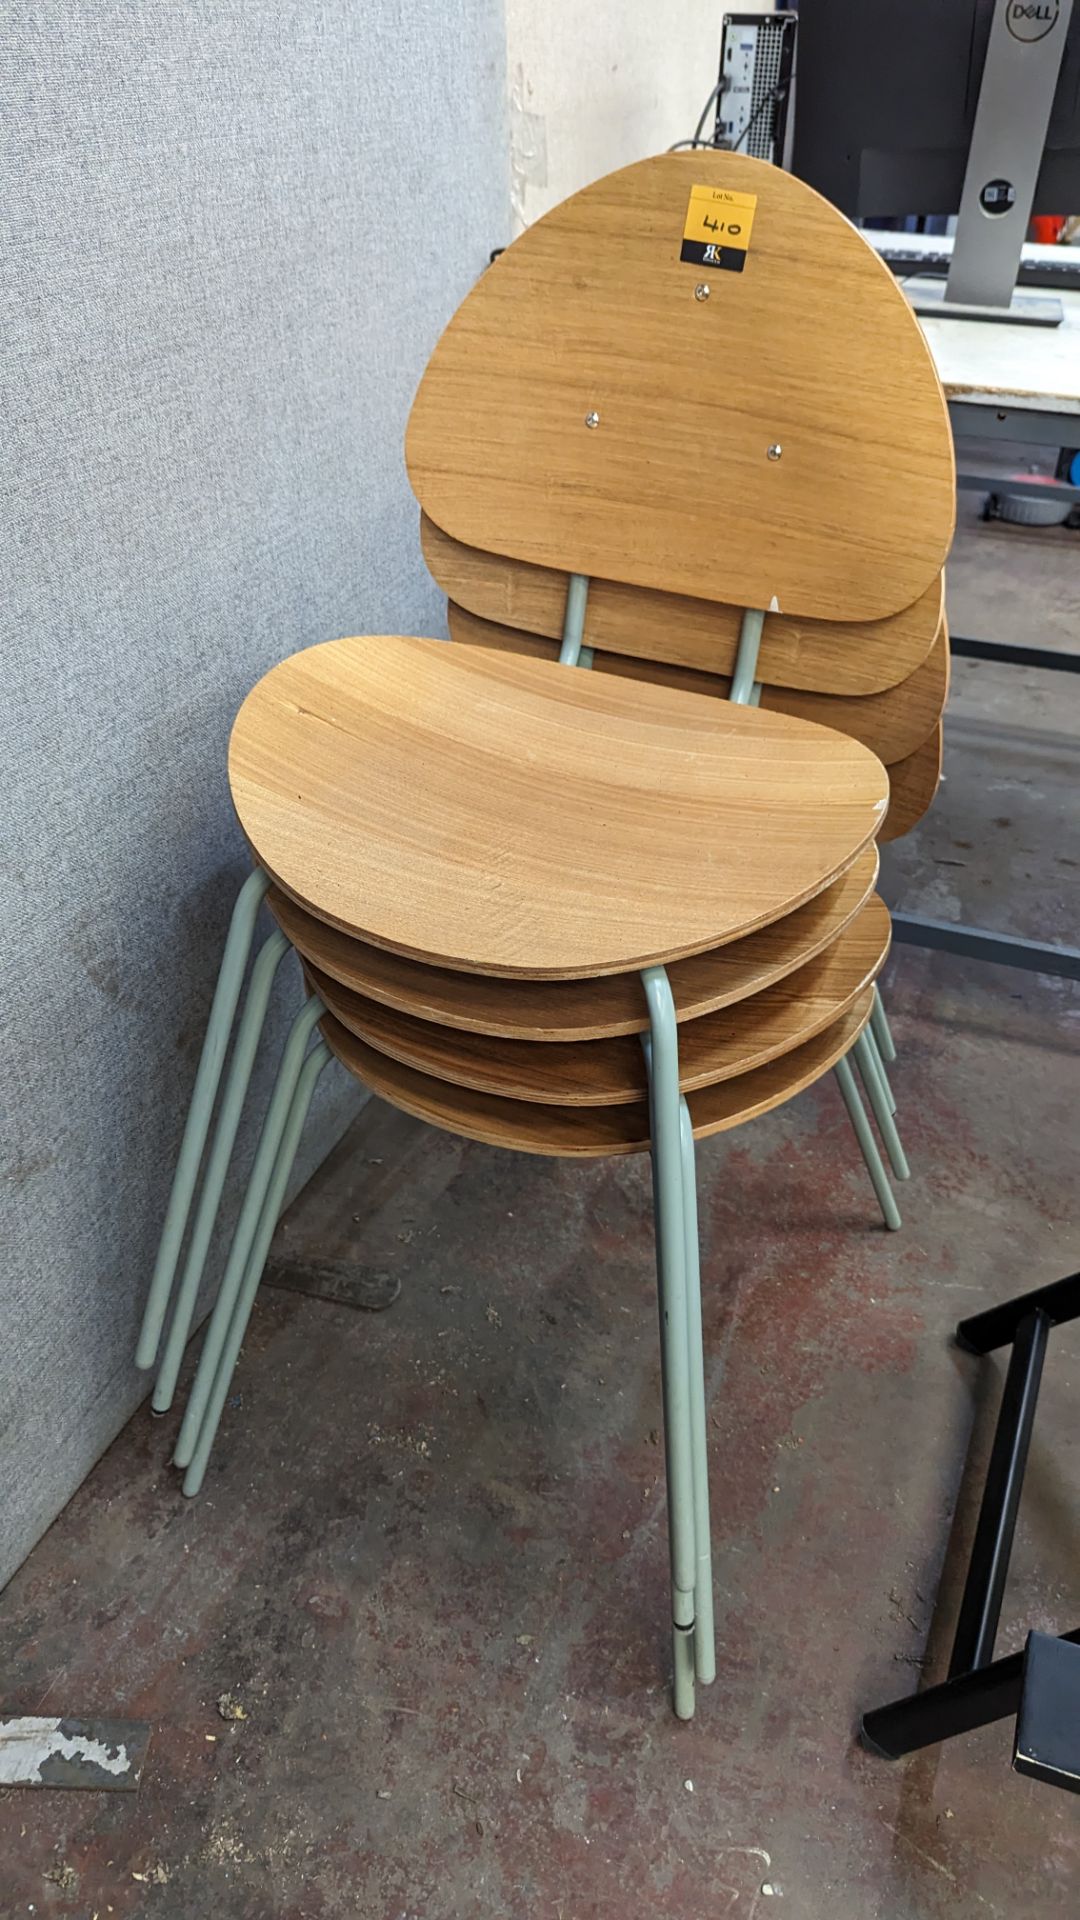 Set of 4 matching stacking chairs - Image 2 of 5